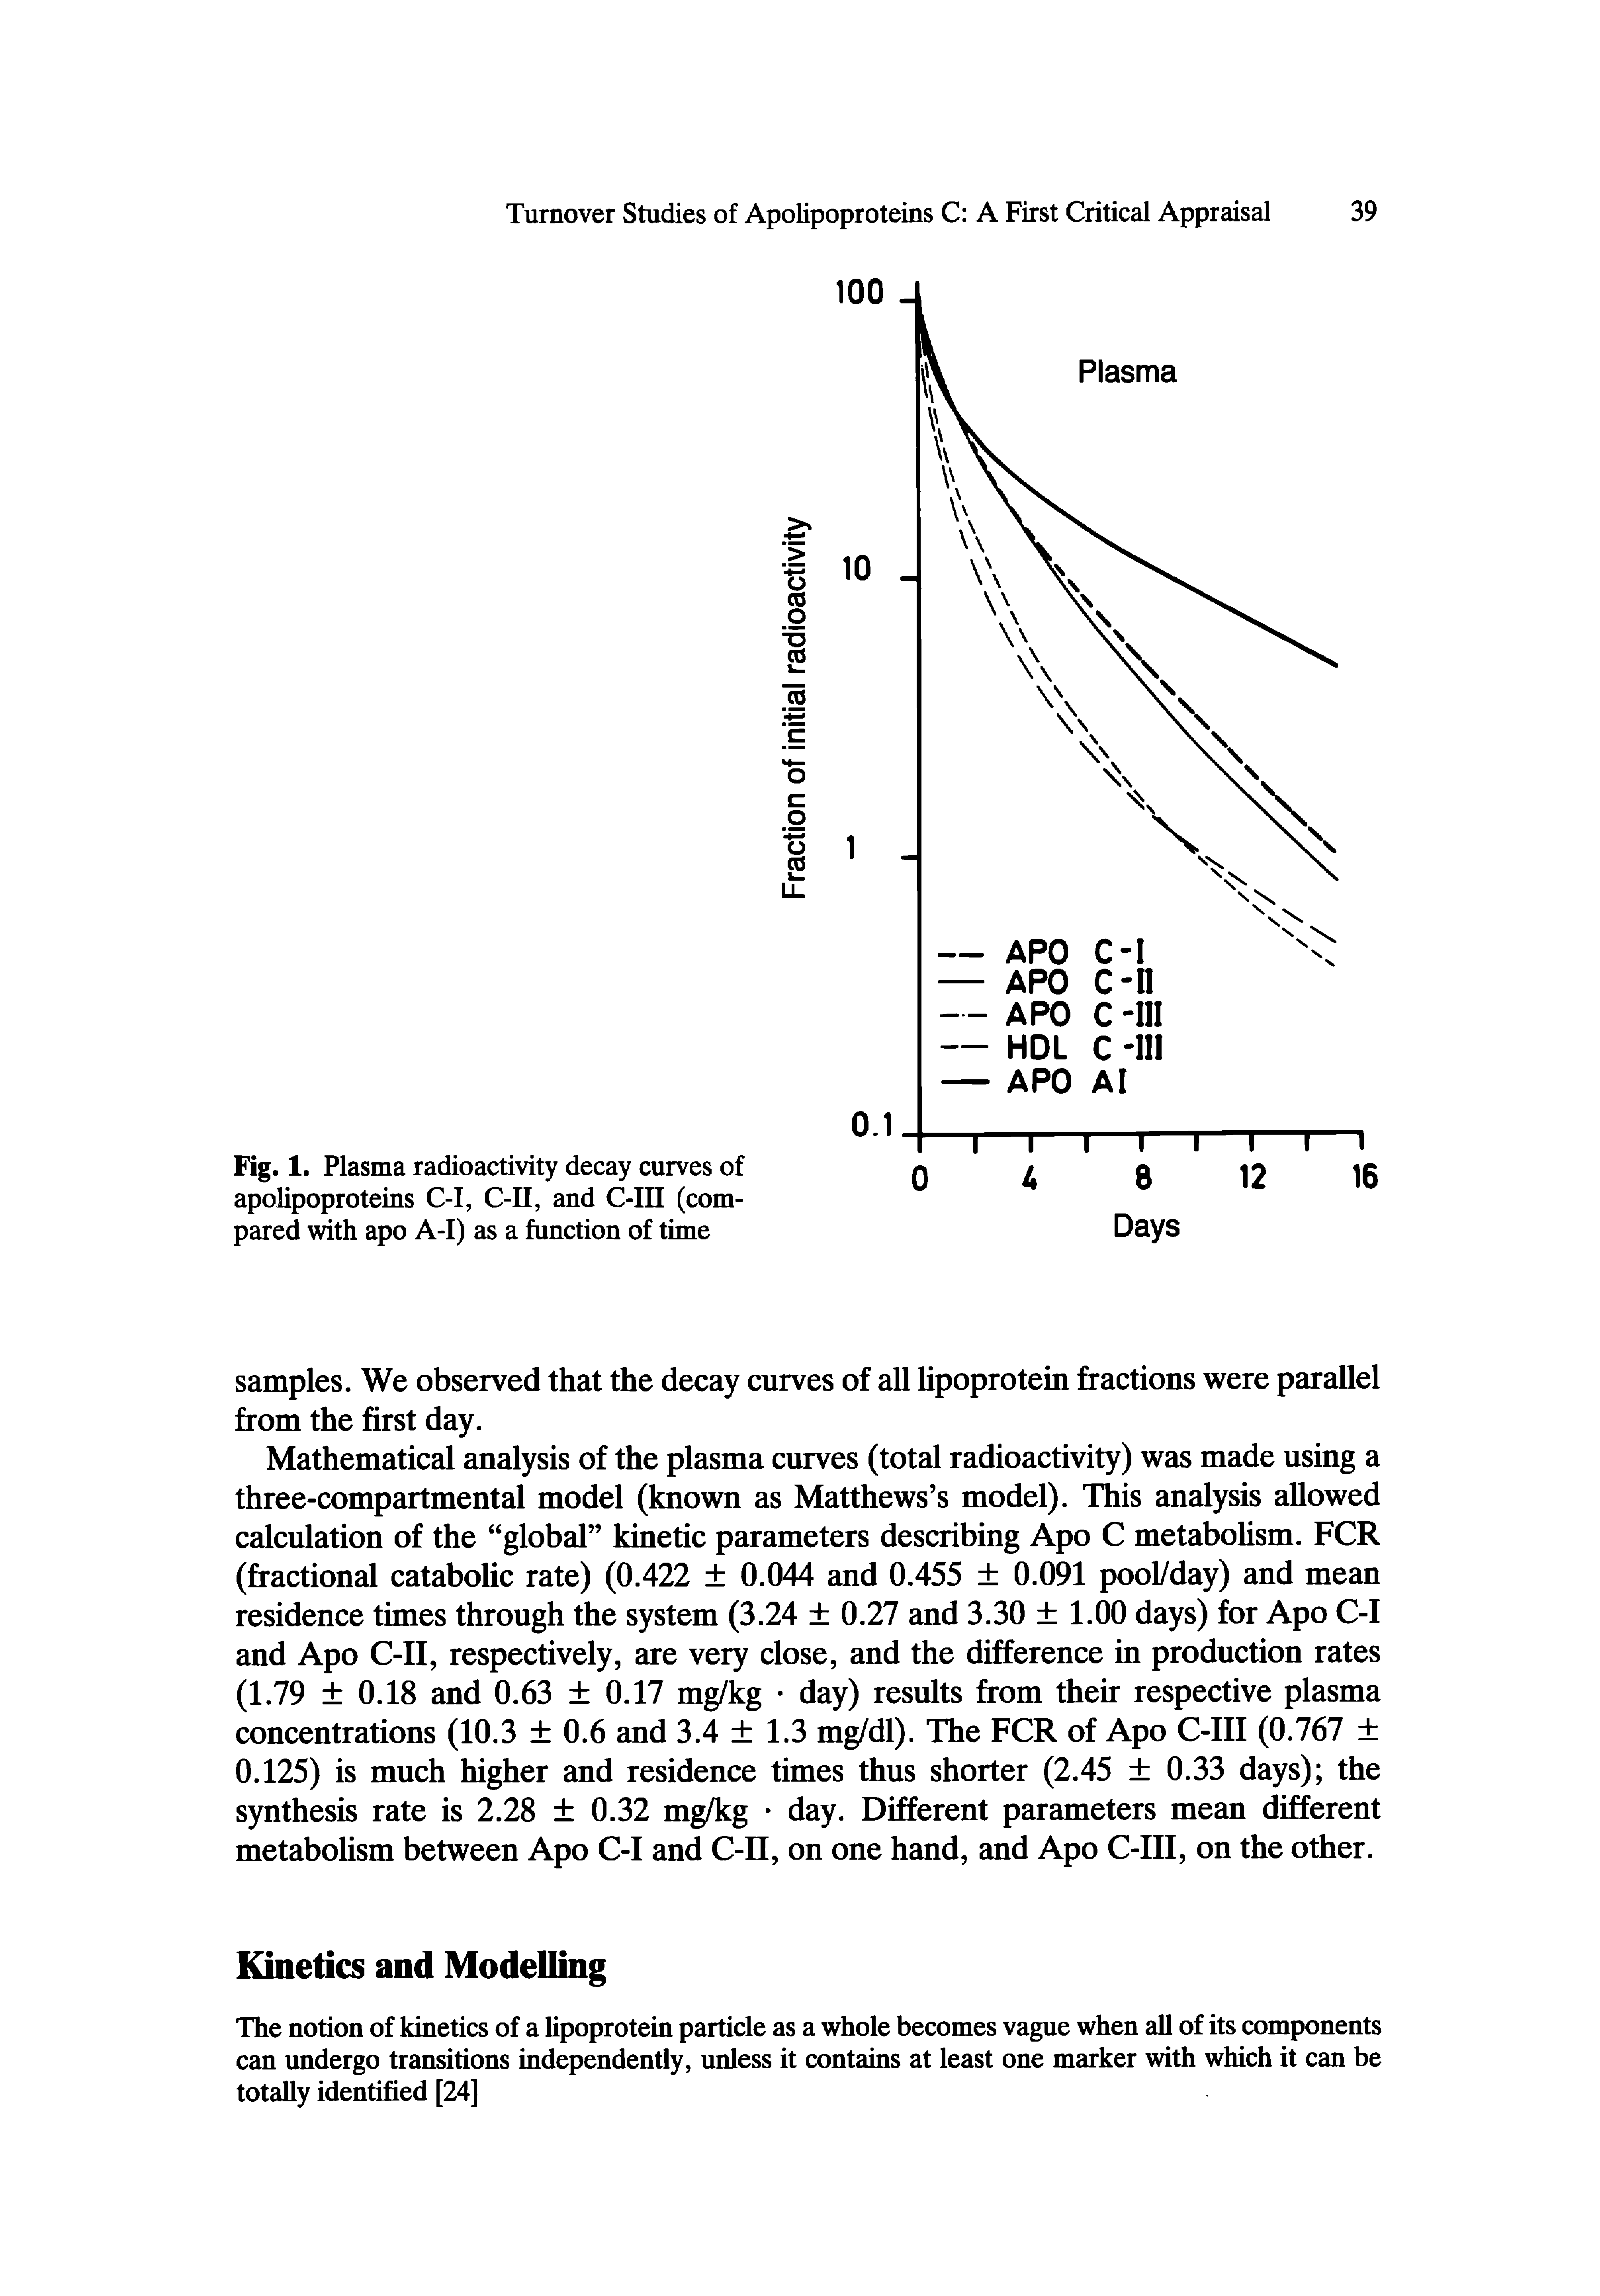 Fig. 1. Plasma radioactivity decay curves of apolipoproteins C-I, C-II, and C-in (compared with apo A-I) as a function of time...